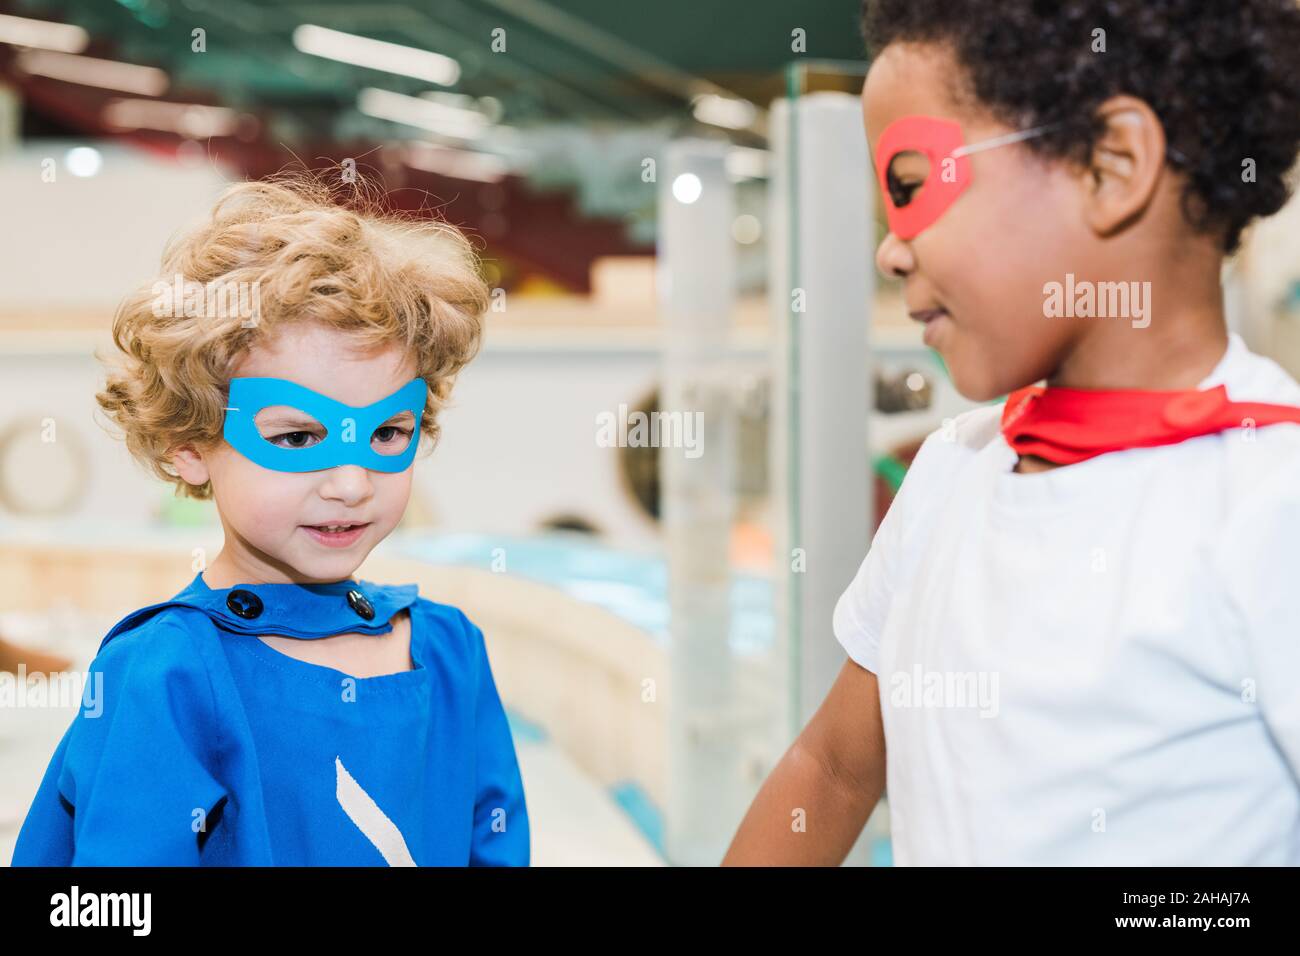 Two little boys wearing costumes of superheroes playing together in kindergarten Stock Photo